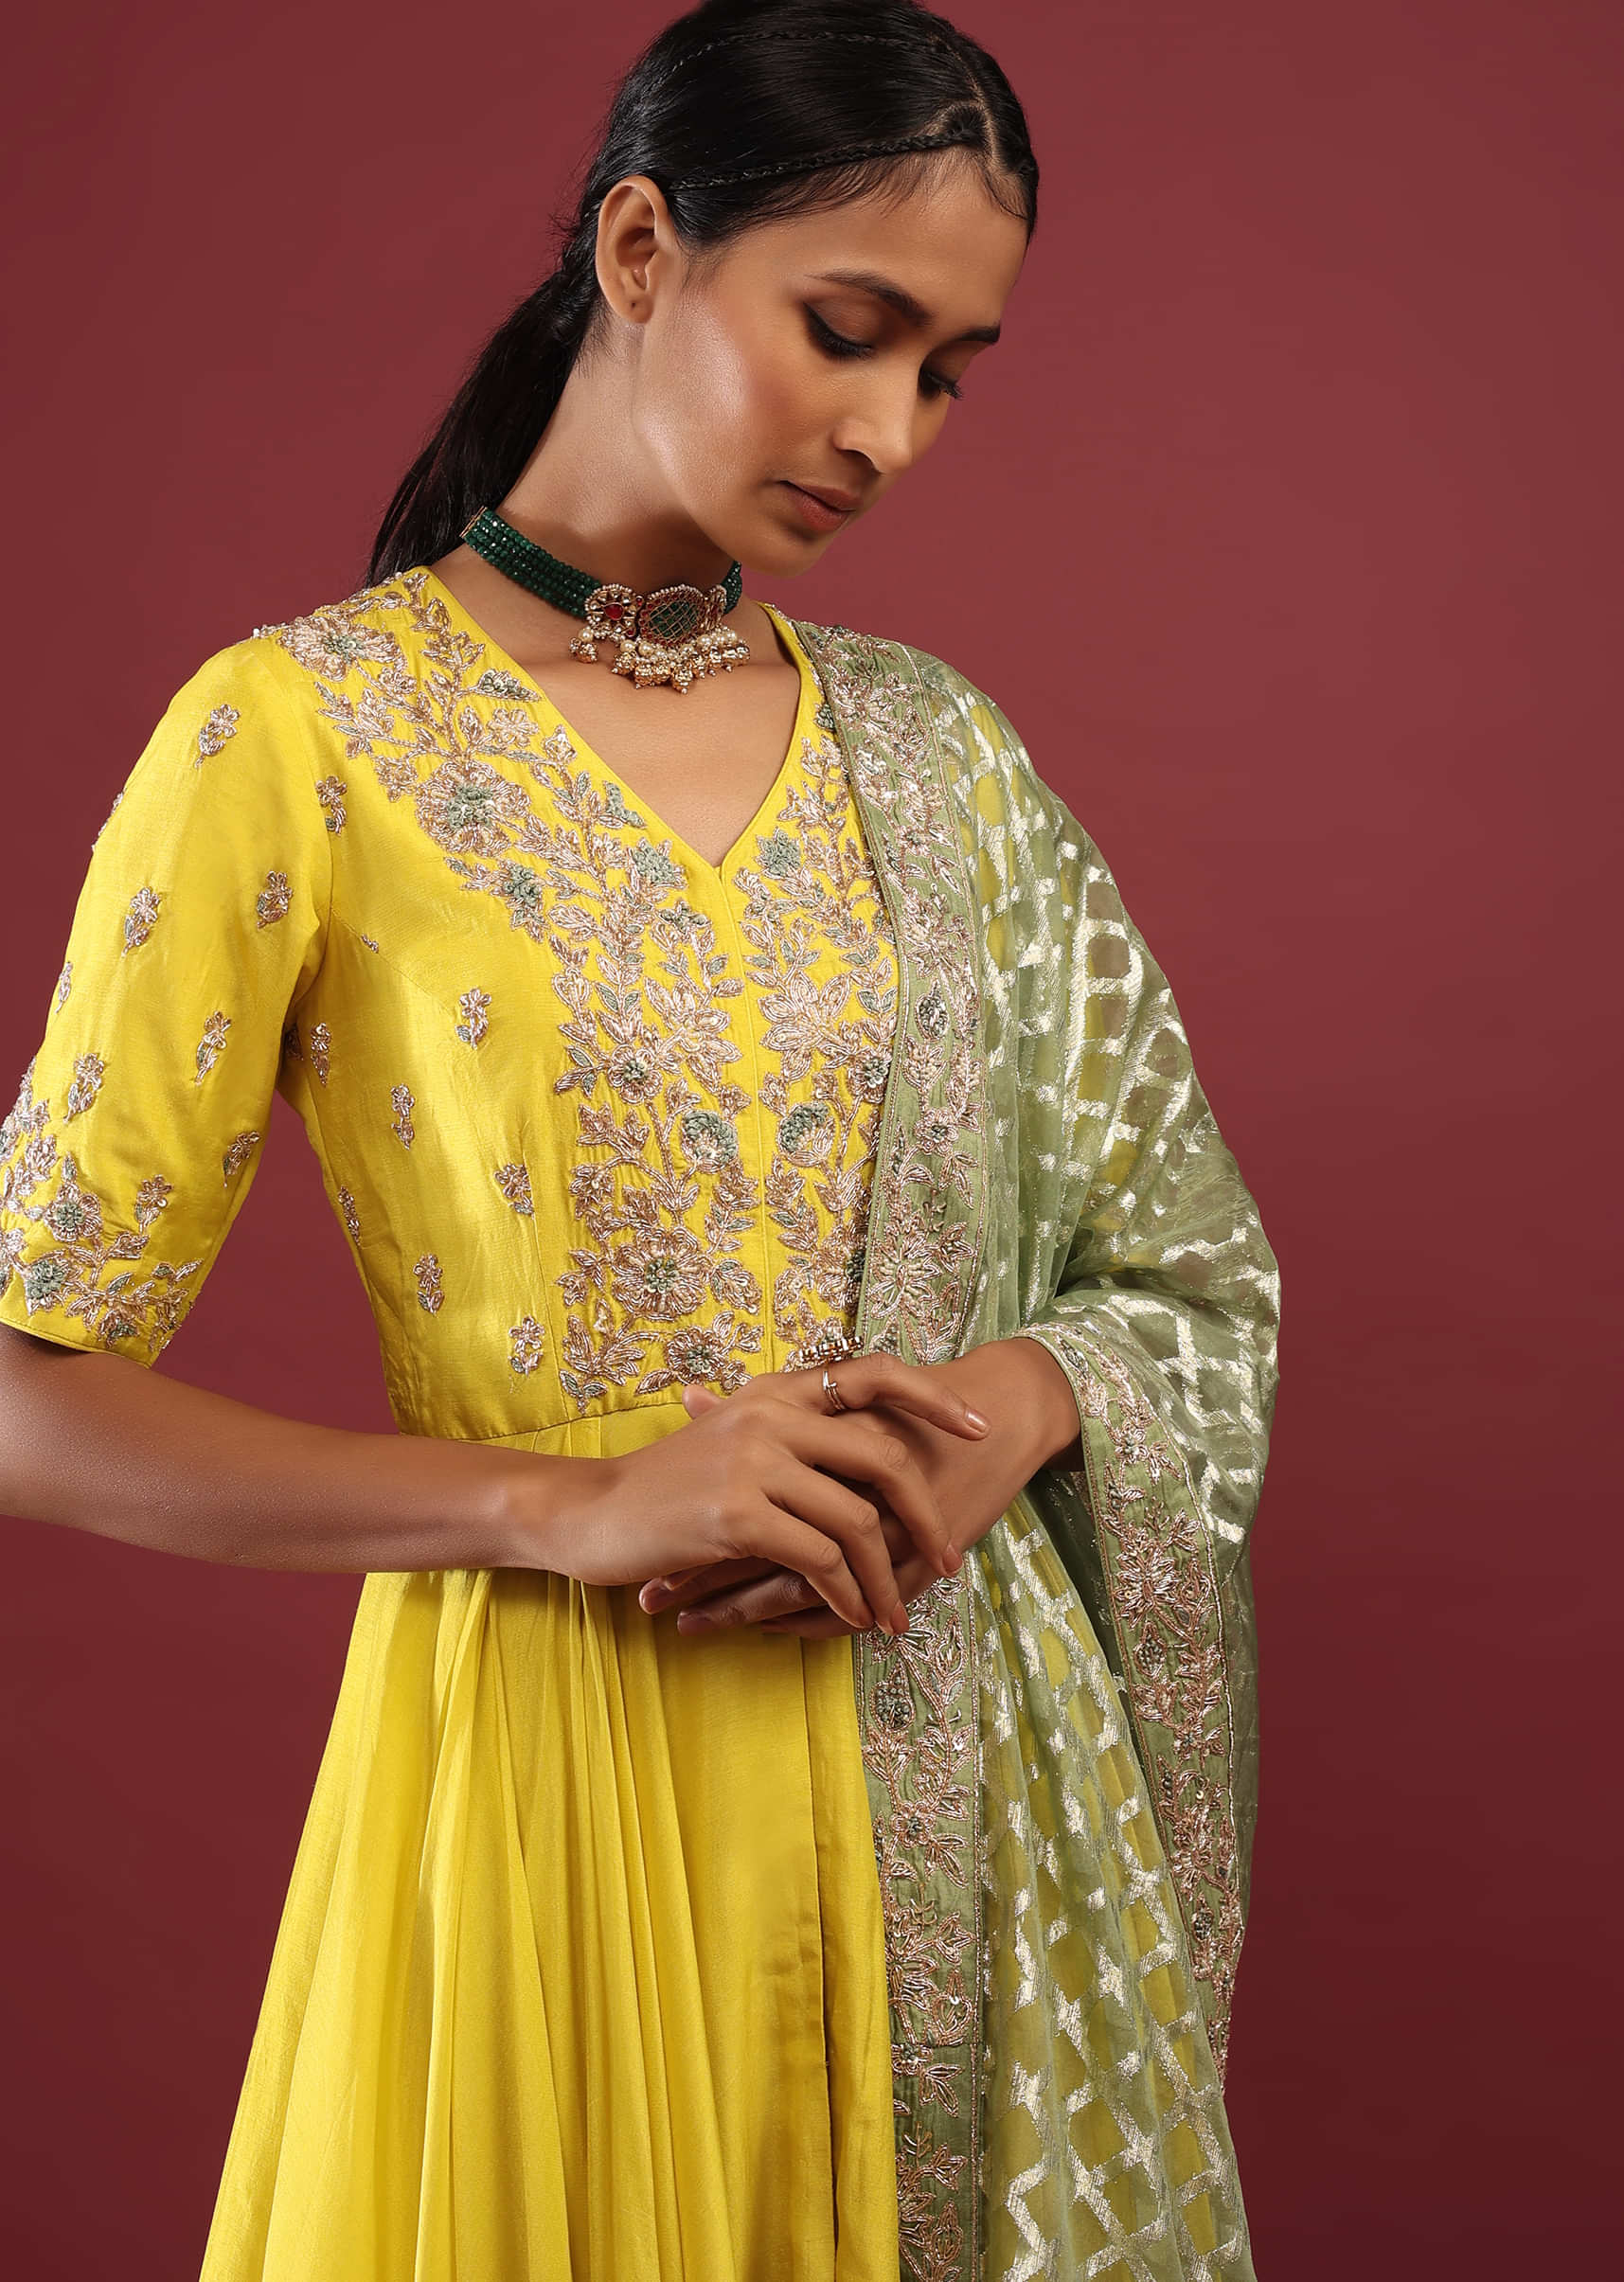 Corn Yellow High Low Anarkali Suit With A Front Slit, Zardosi Embroidered Flowers And Sage Green Lurex Dupatta